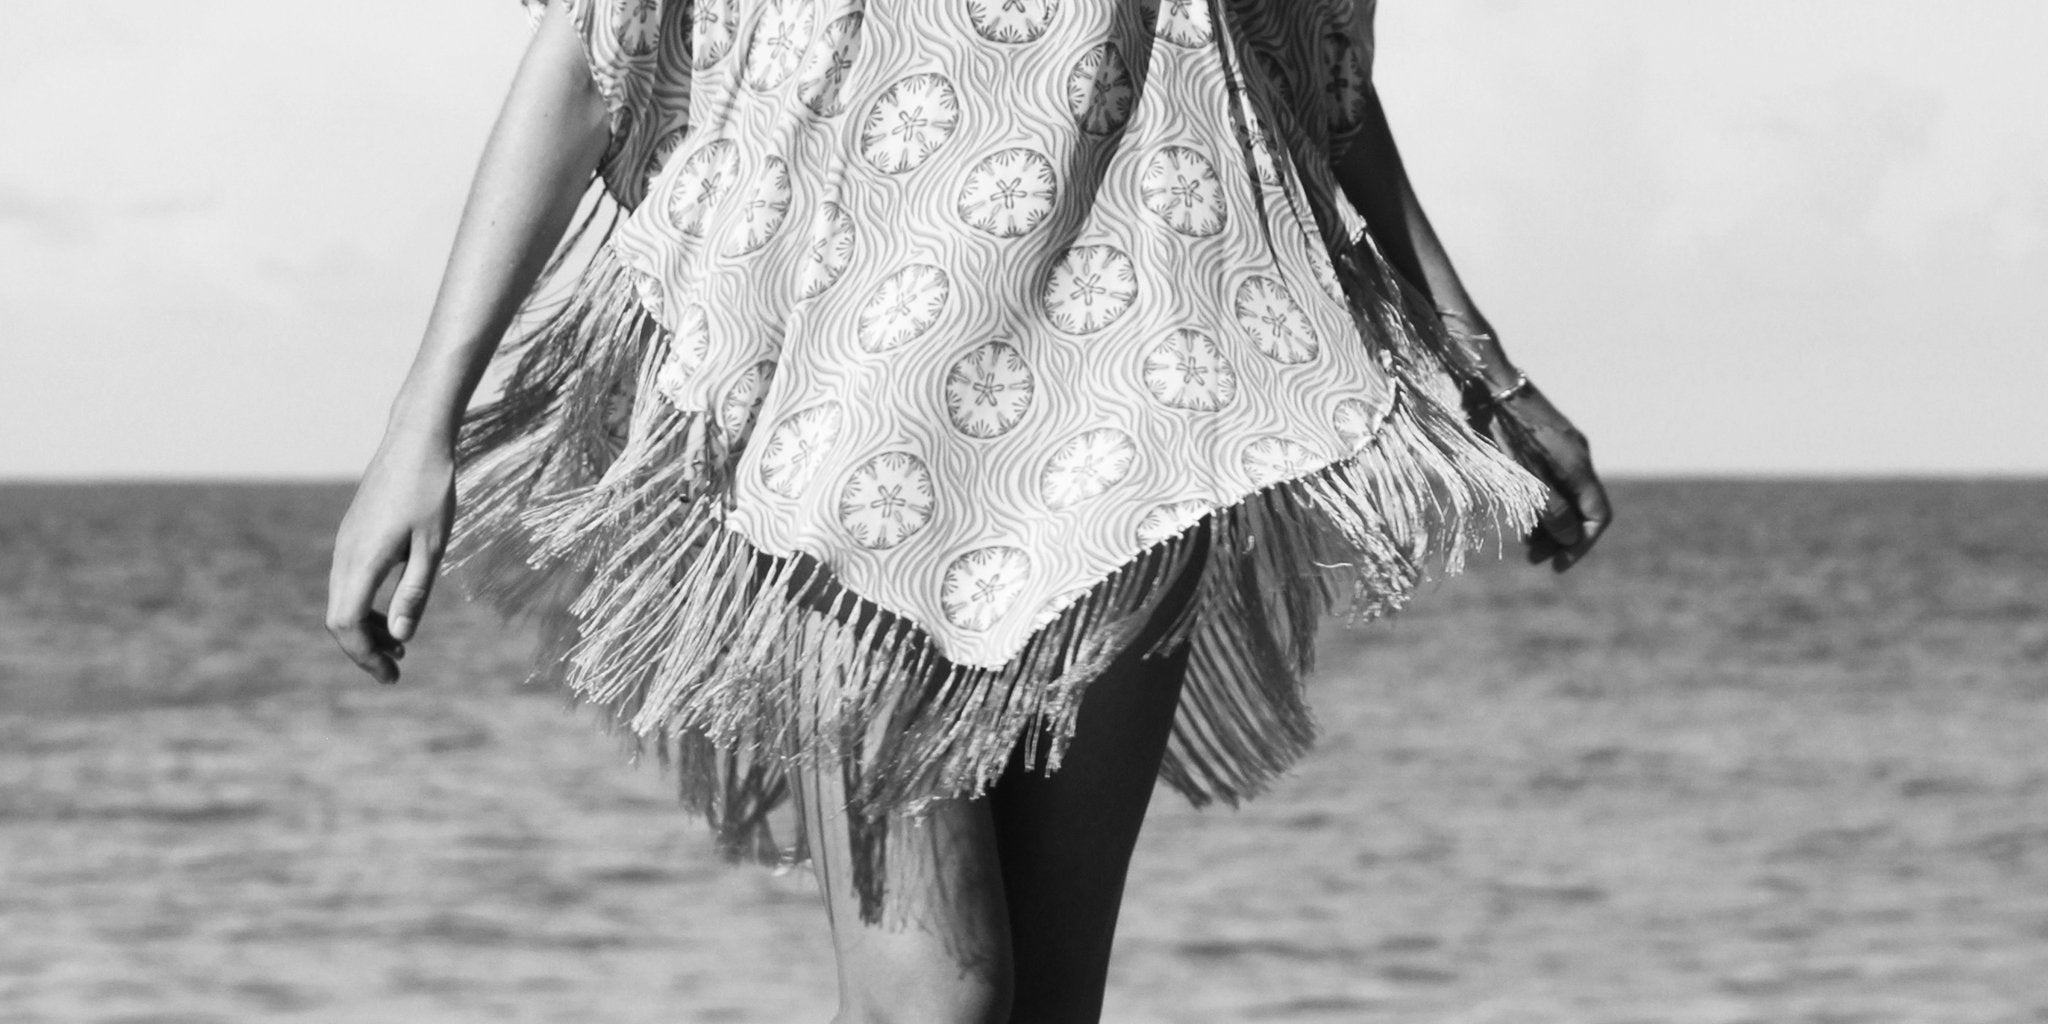 A fringed poncho makes a useful chic cover up. Dress up with baggy pants & heels for elegant cocktail style, transform casual slim cut jeans for instant glamour or throw over a bikini on the beach when there's a little evening chill.